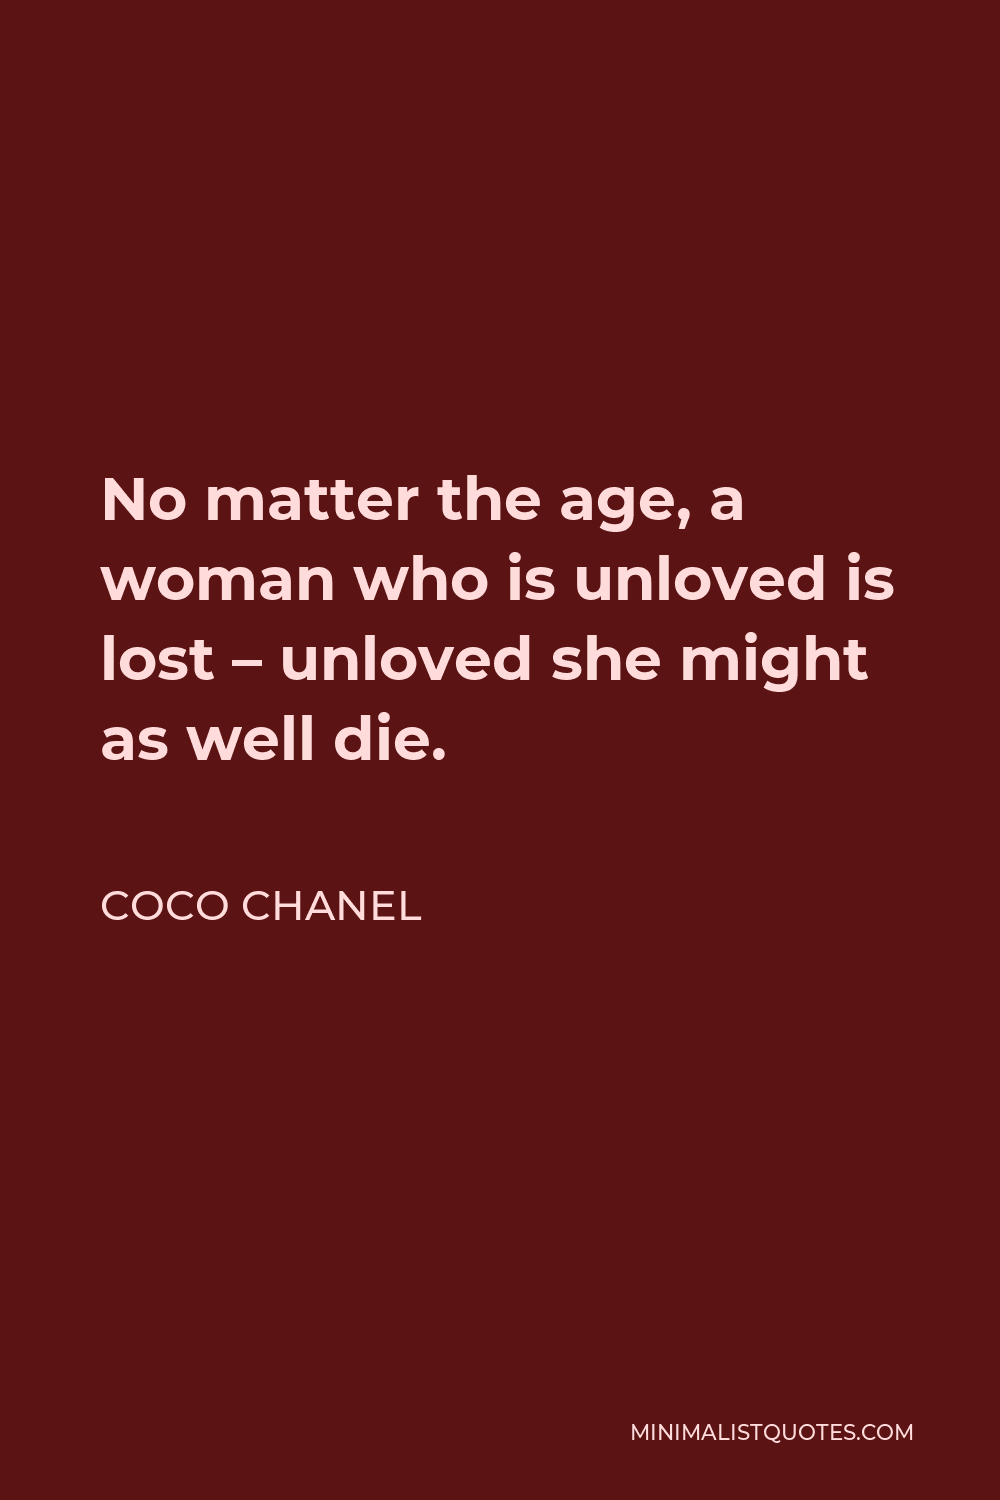 Quotes From Coco Chanel QuotesGram